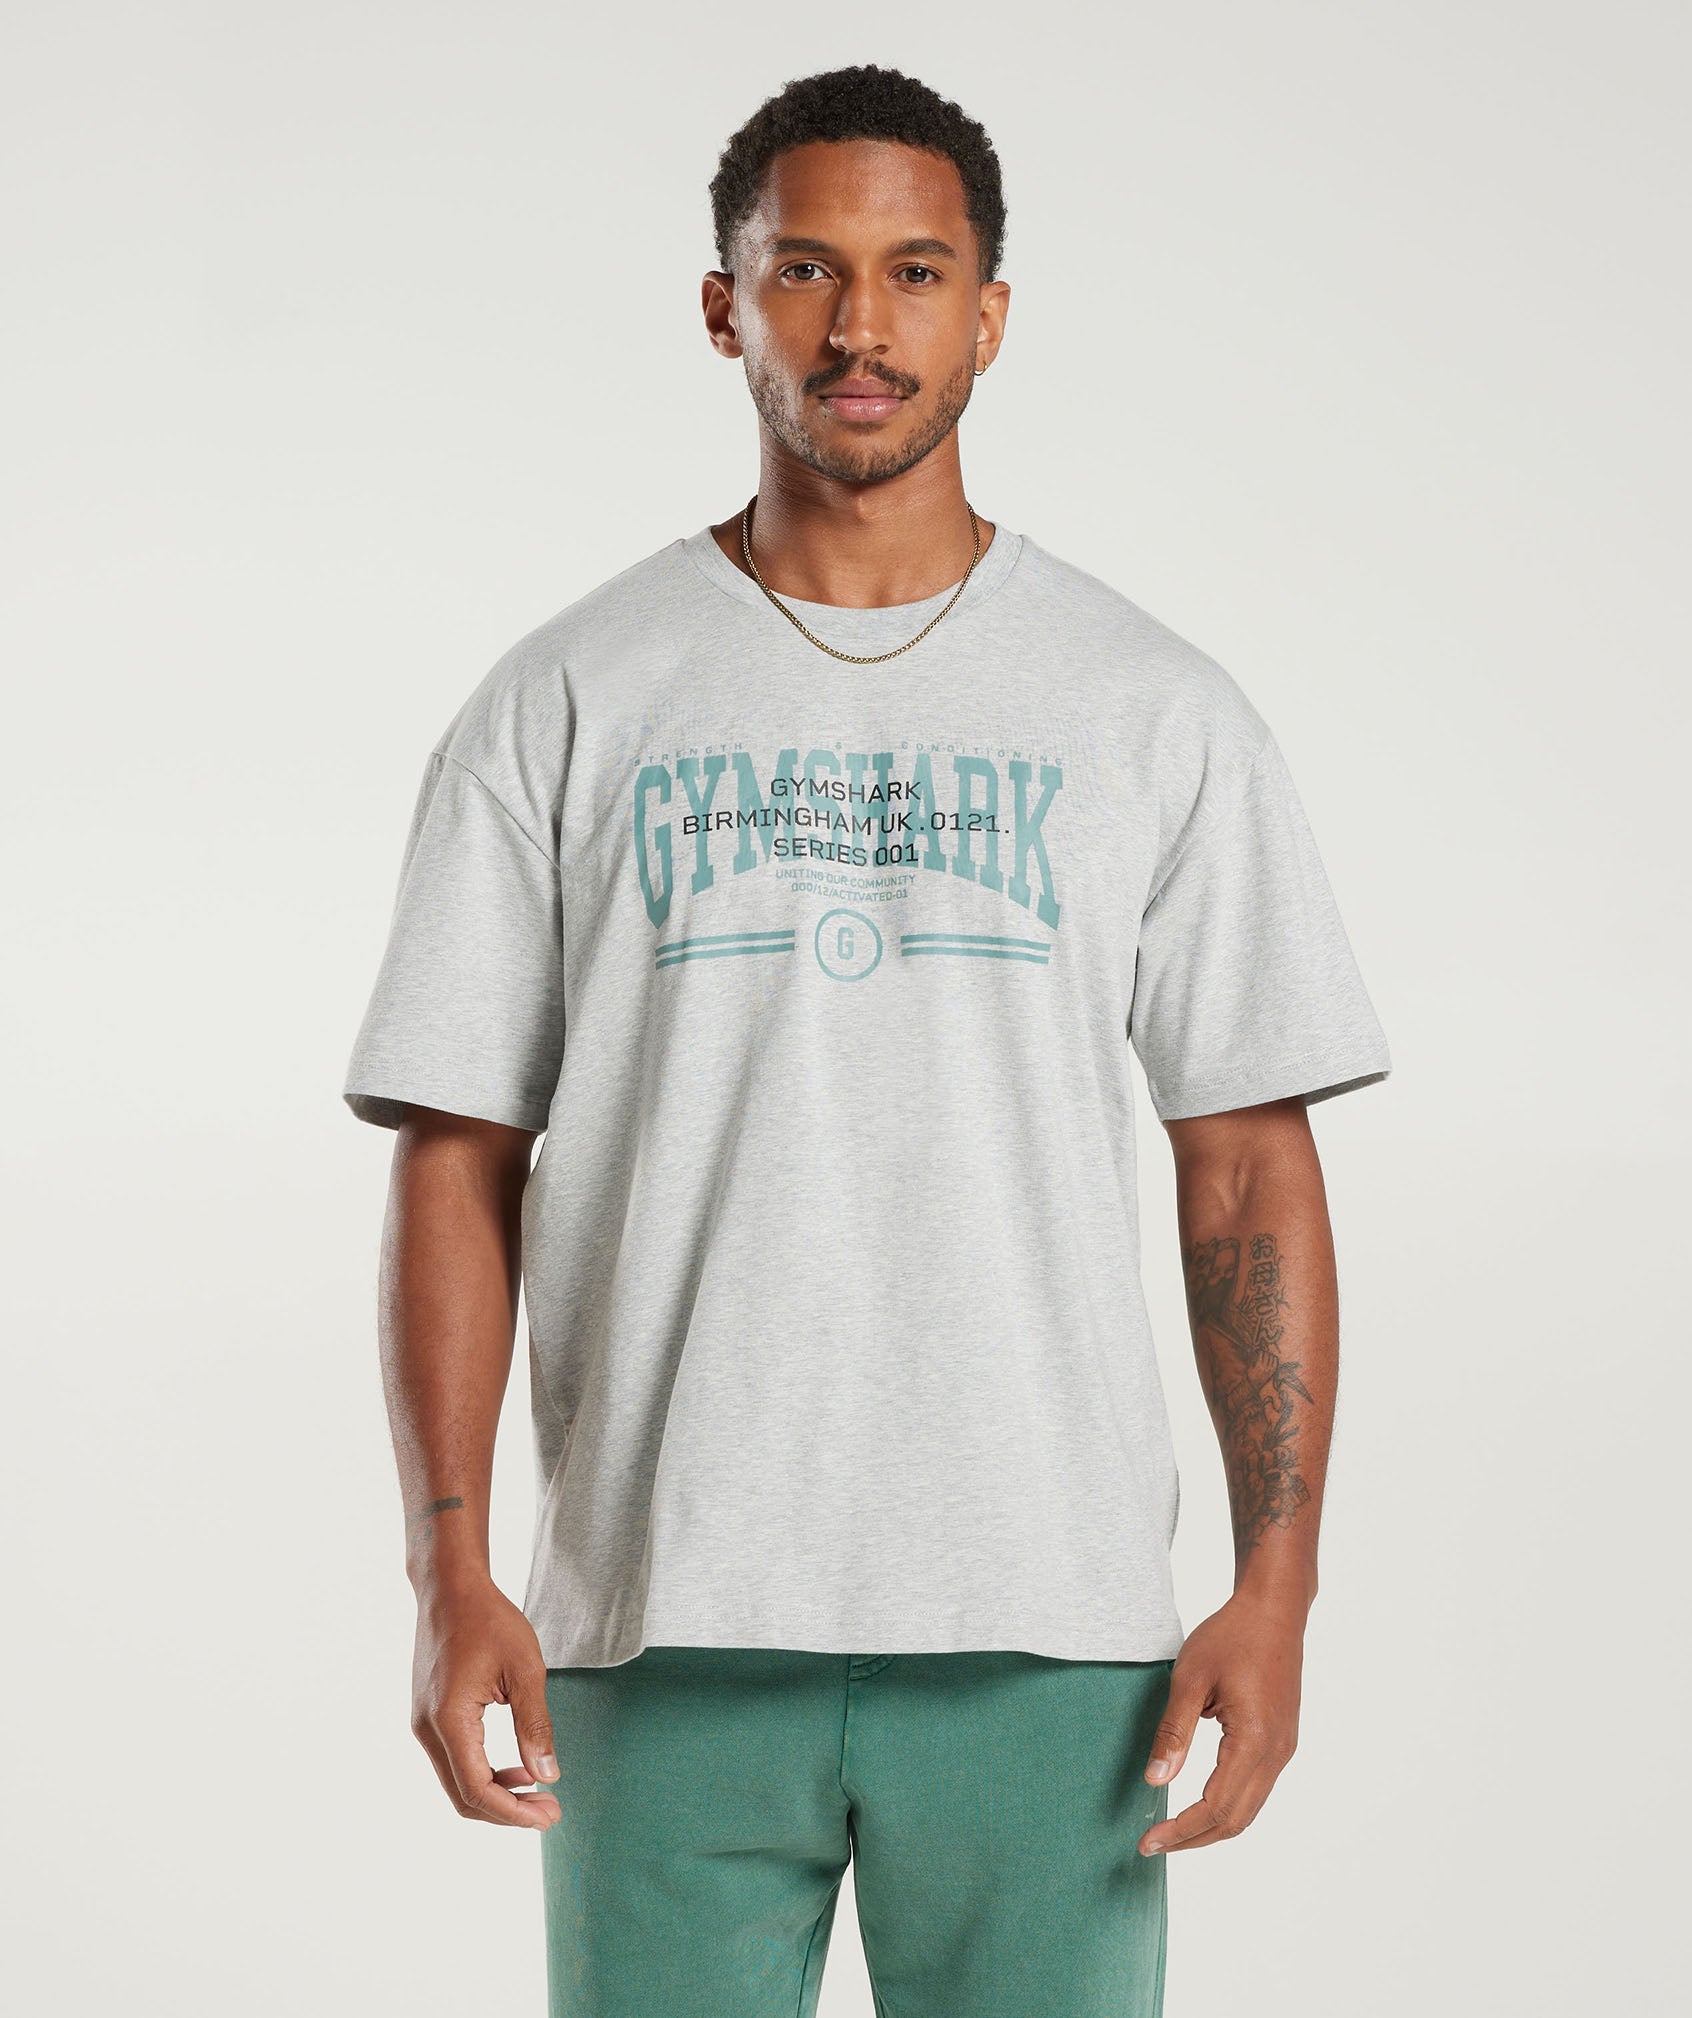 Collegiate Oversized T-Shirt in Light Grey Core Marl - view 1